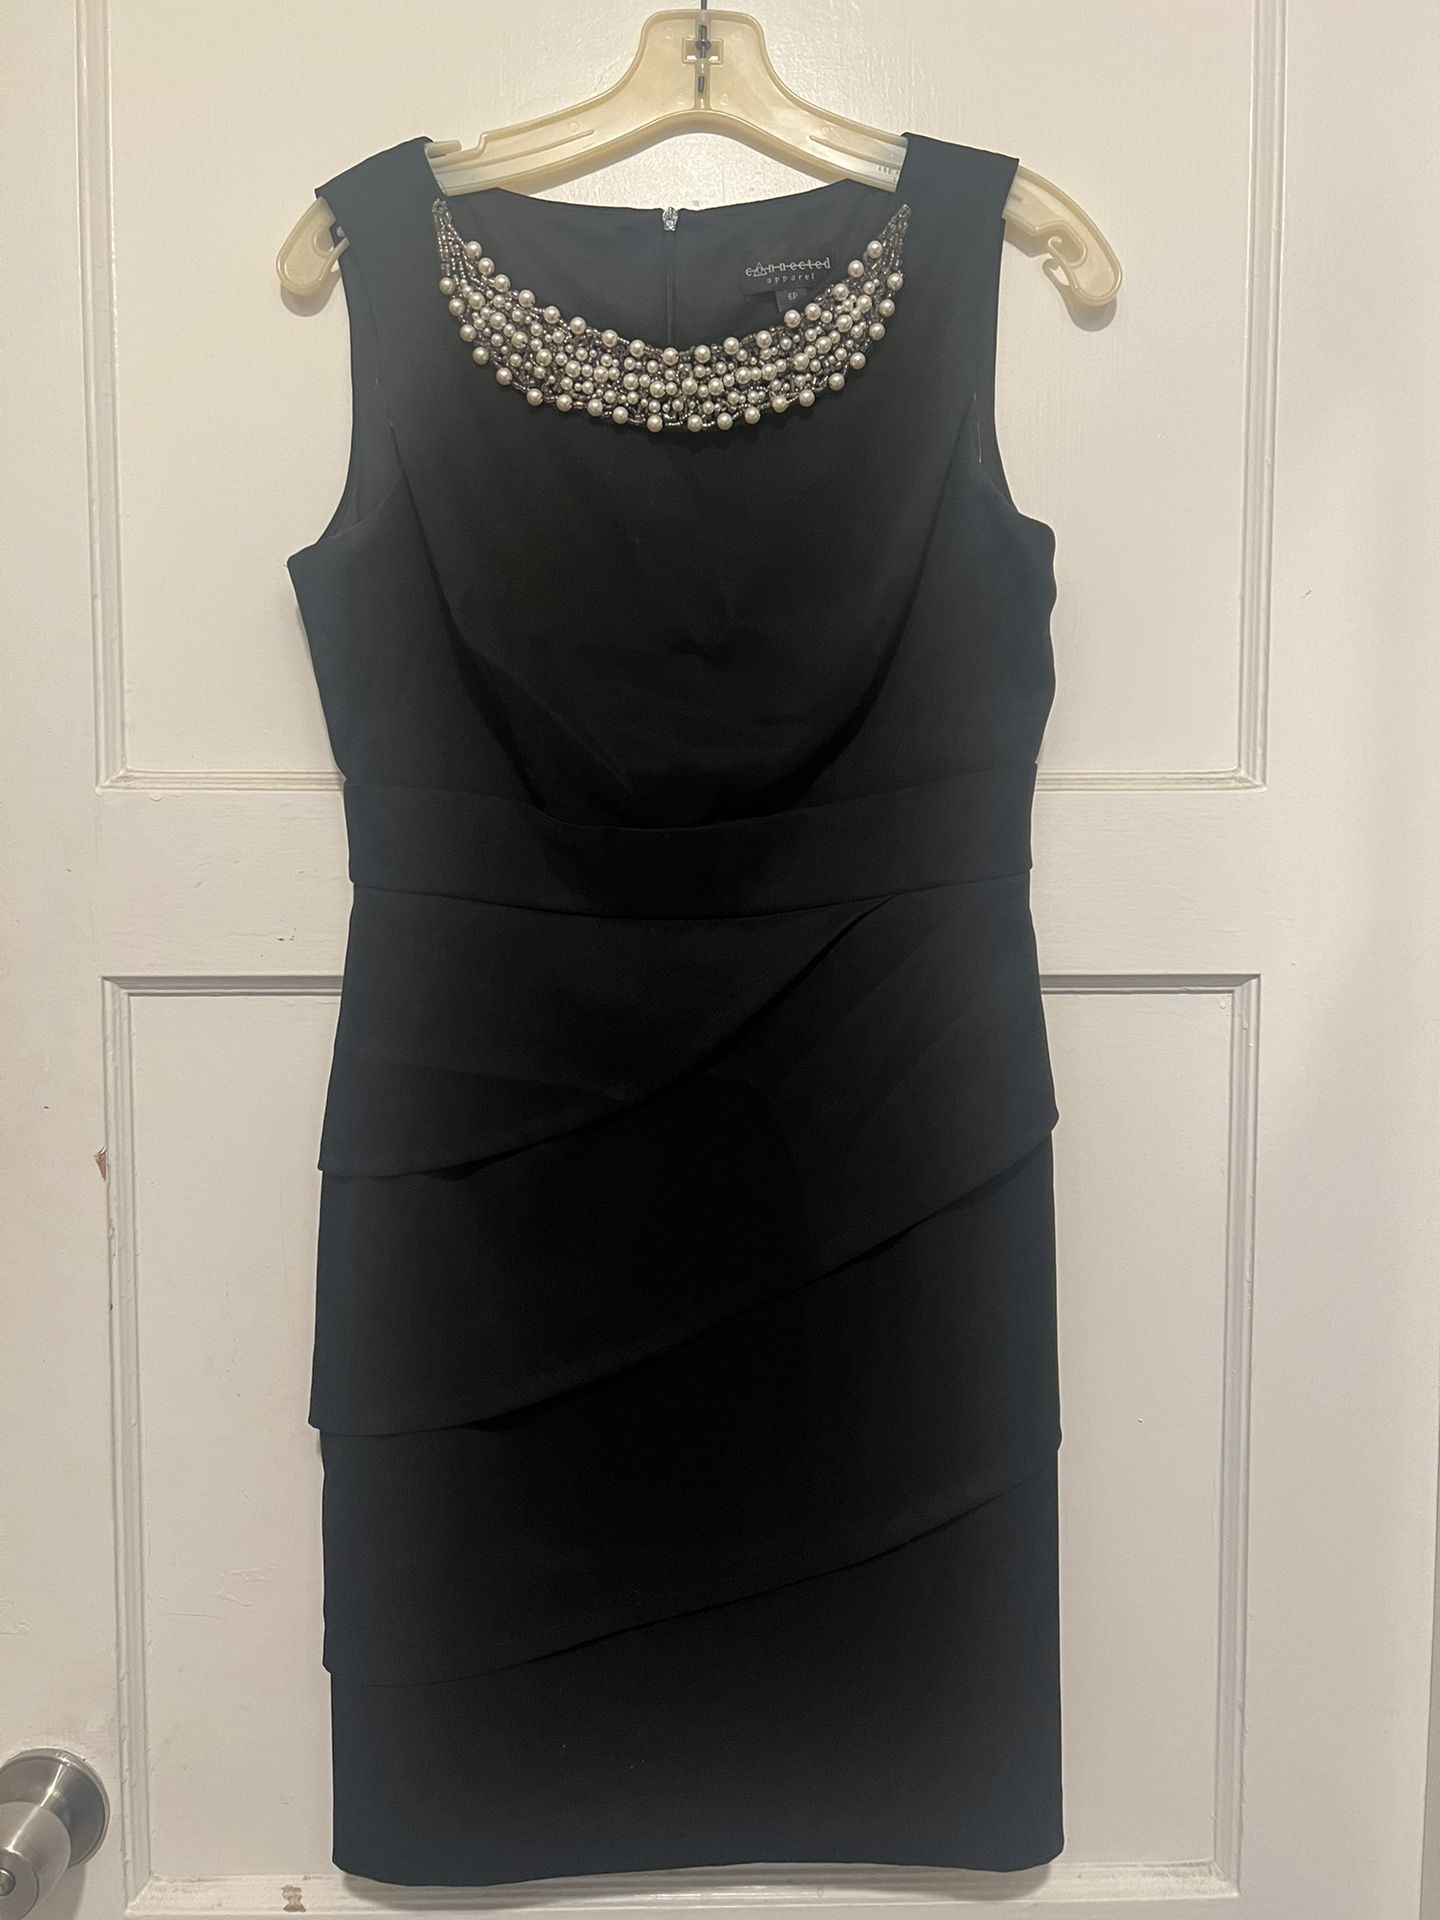 Party dress by Connected Apparel Size 6p